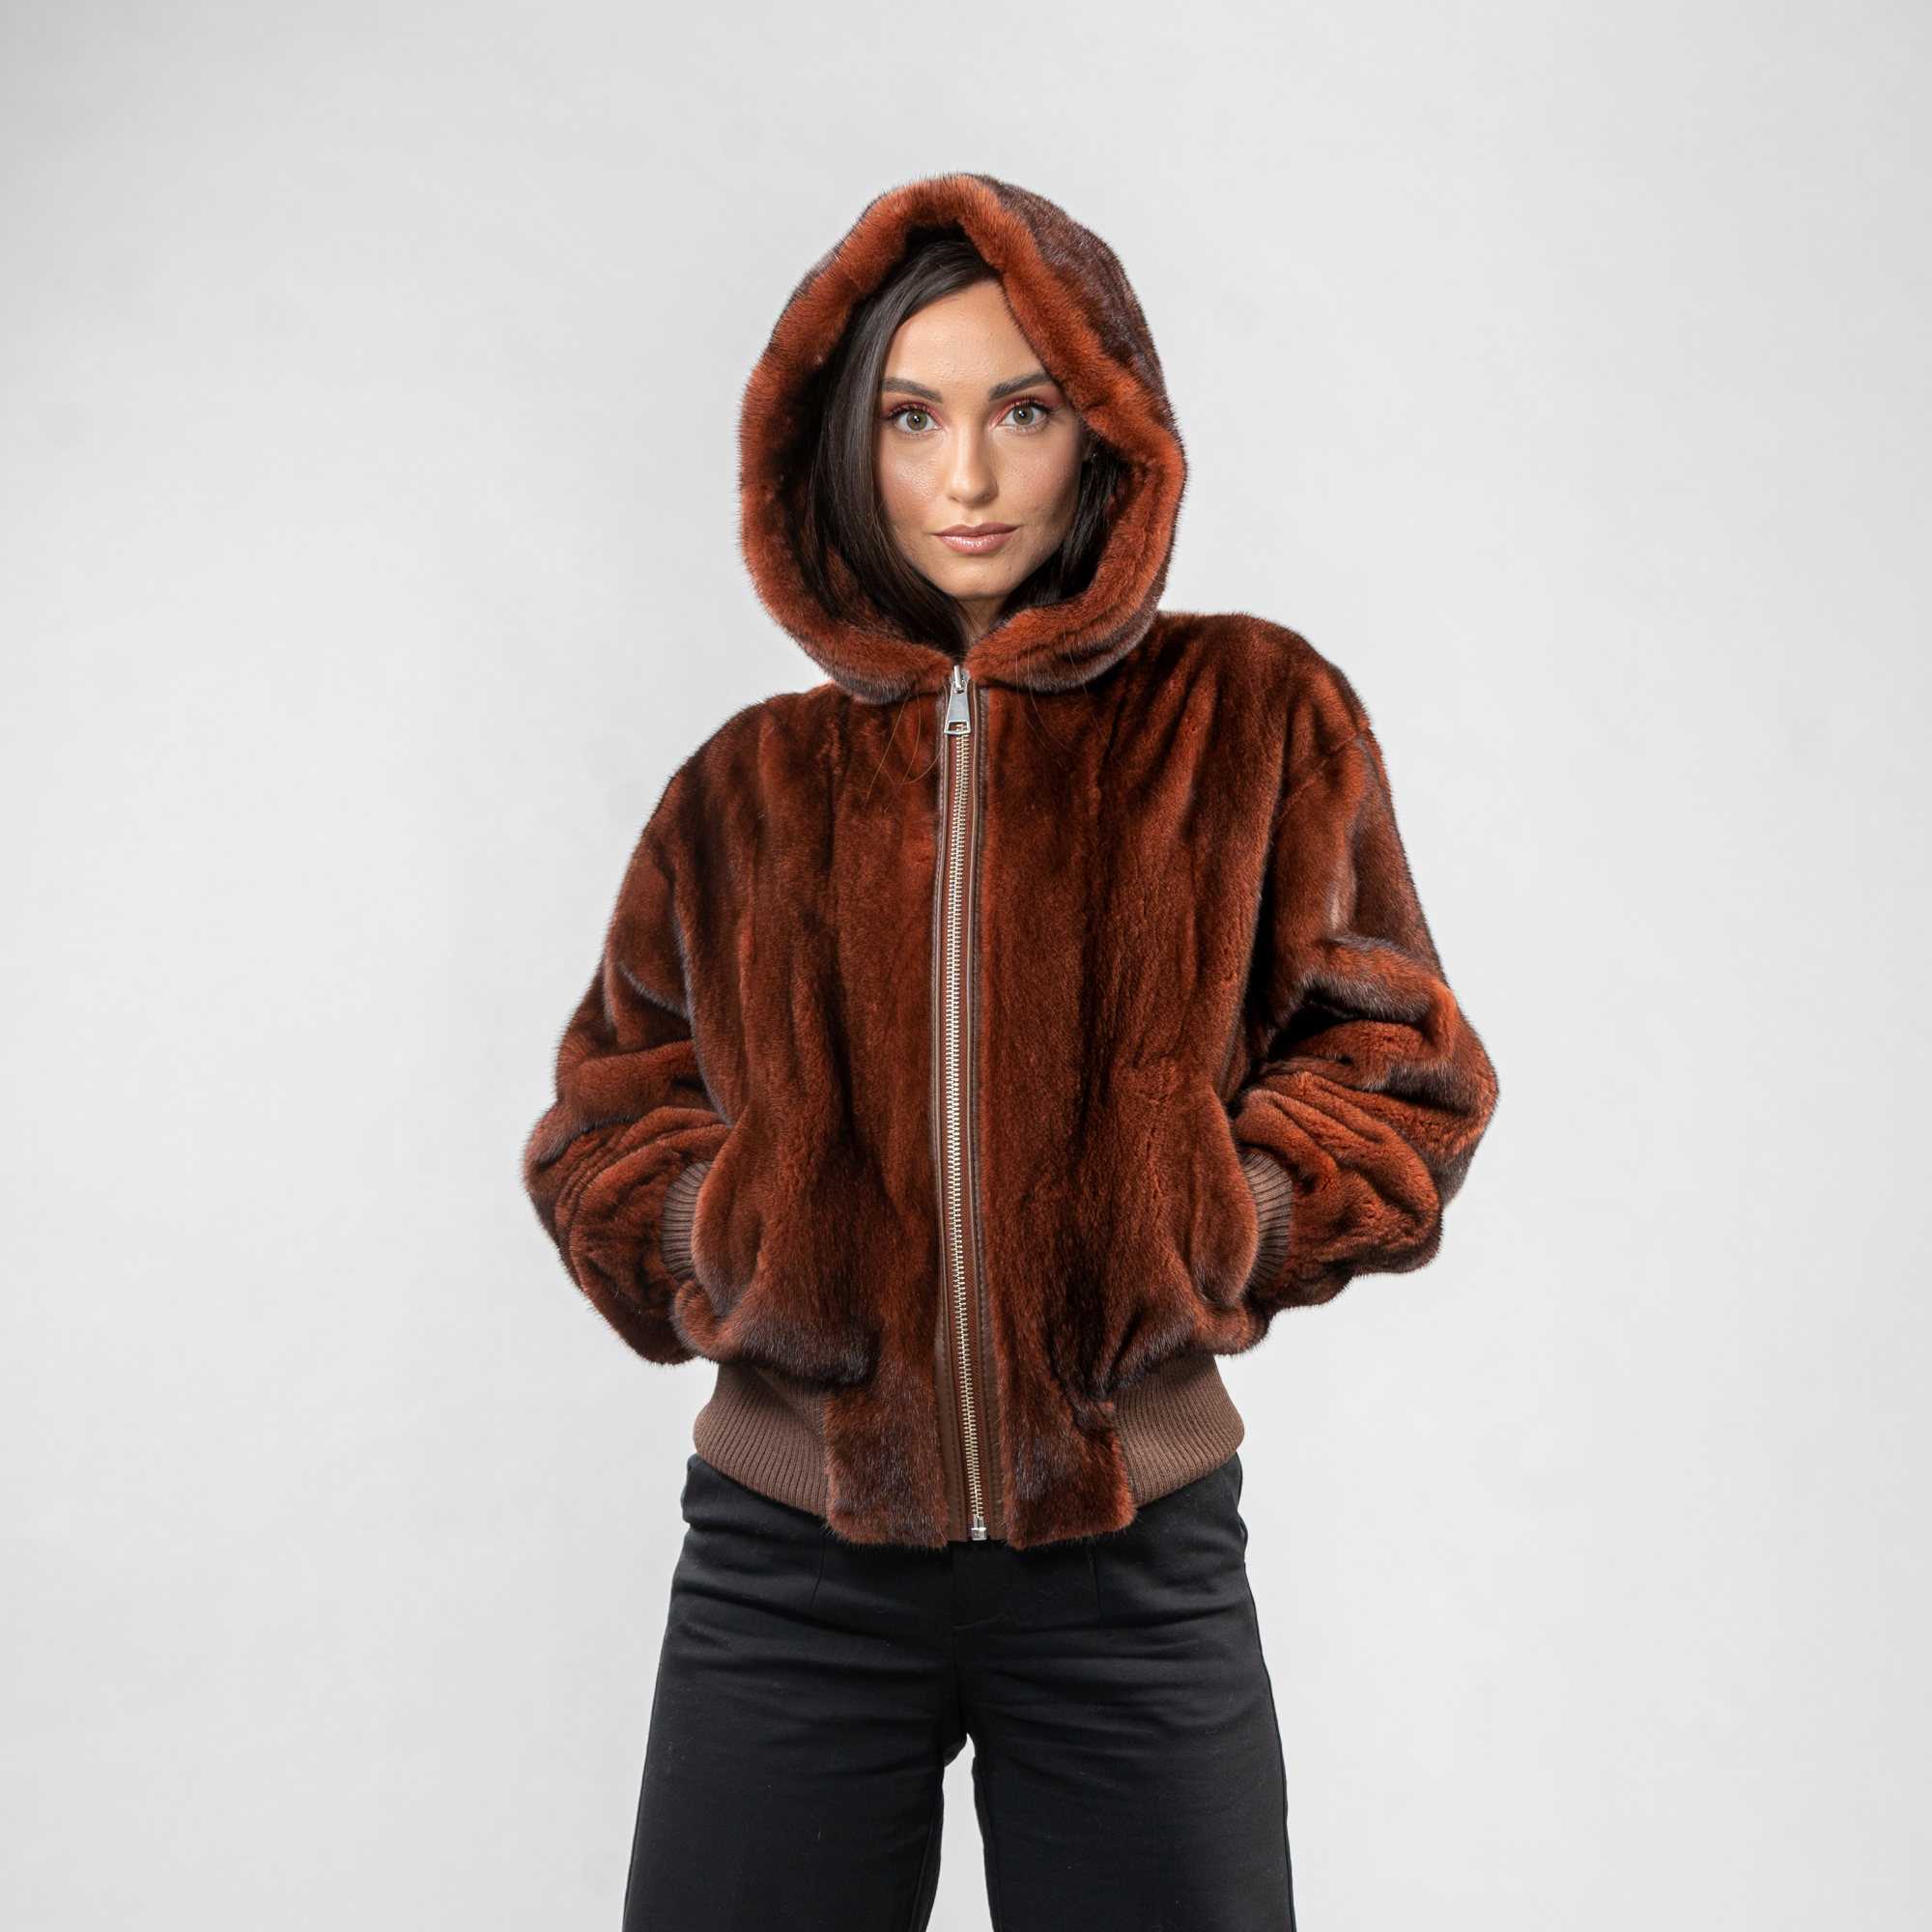 Mink fur jacket with a hood in brown color